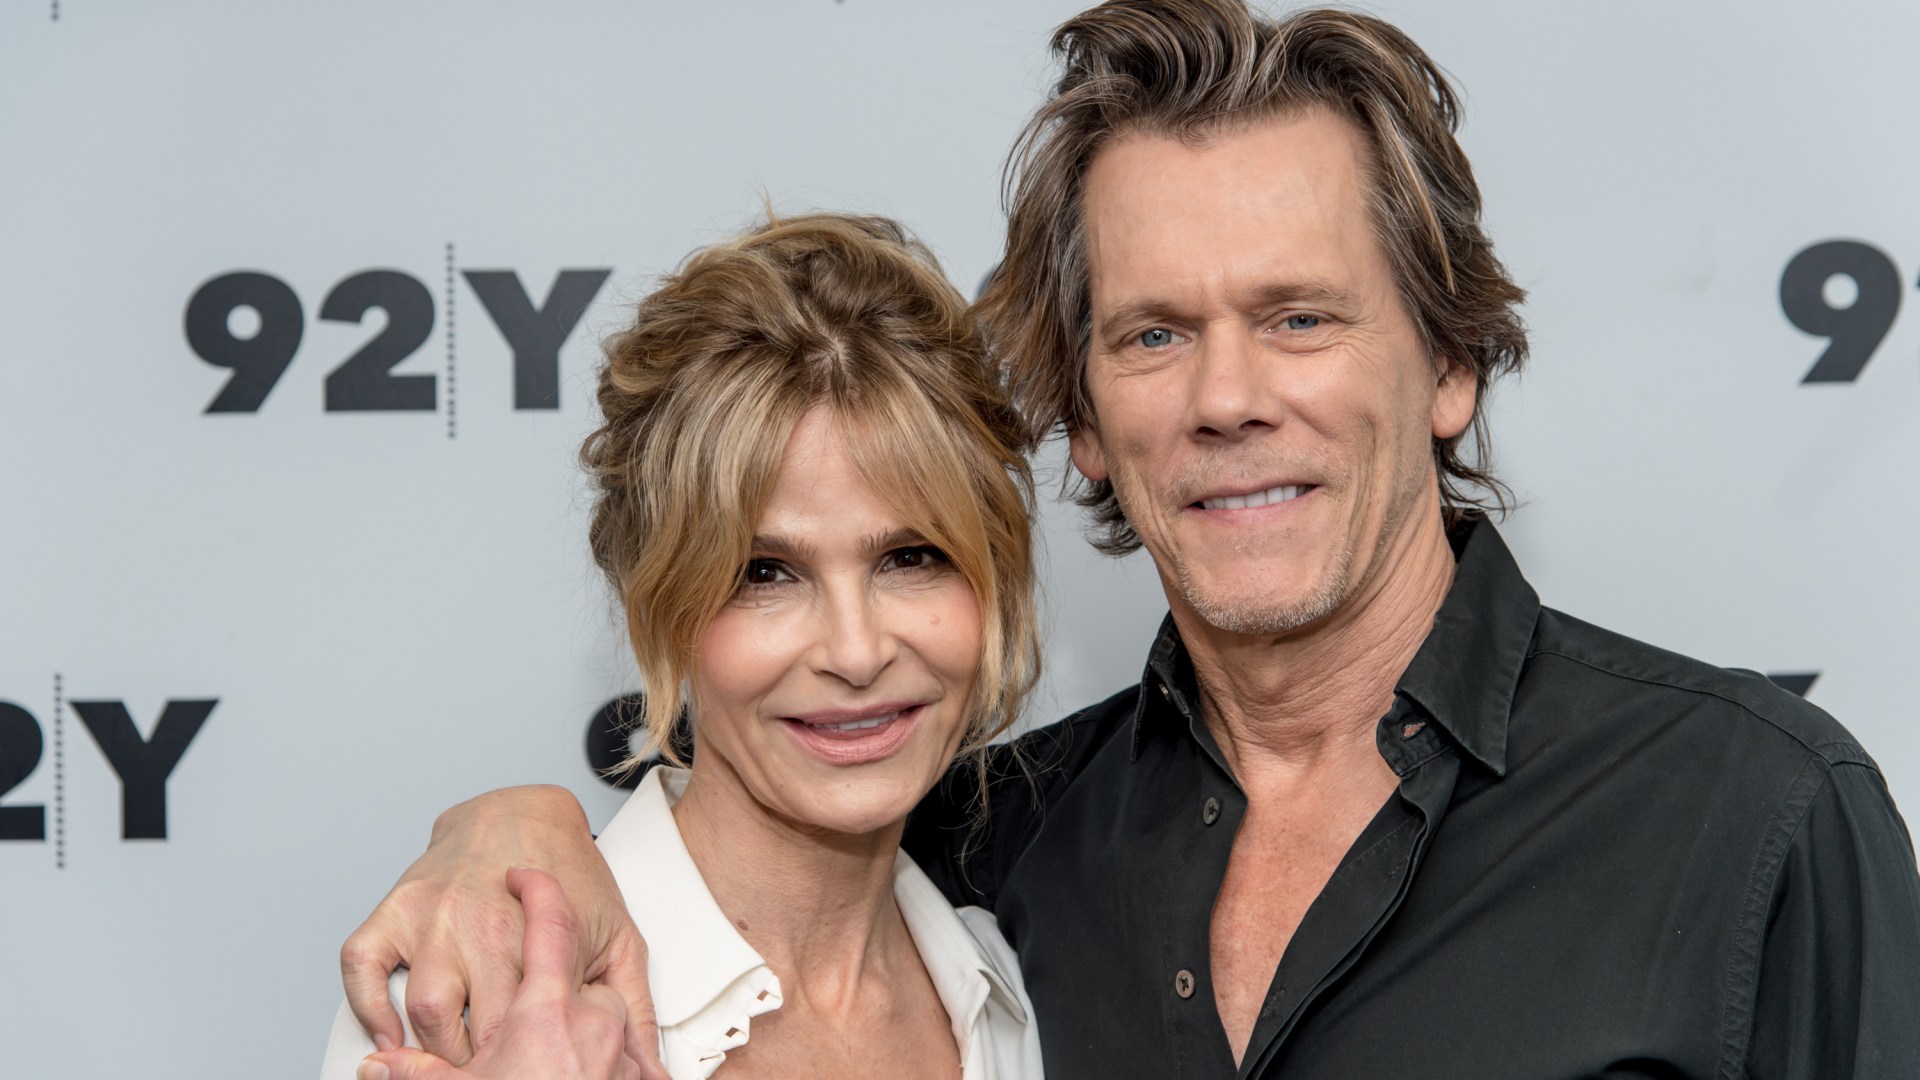 Kevin Bacons Anniversary Messages For Wife Kyra Sedgwick Are Adorable